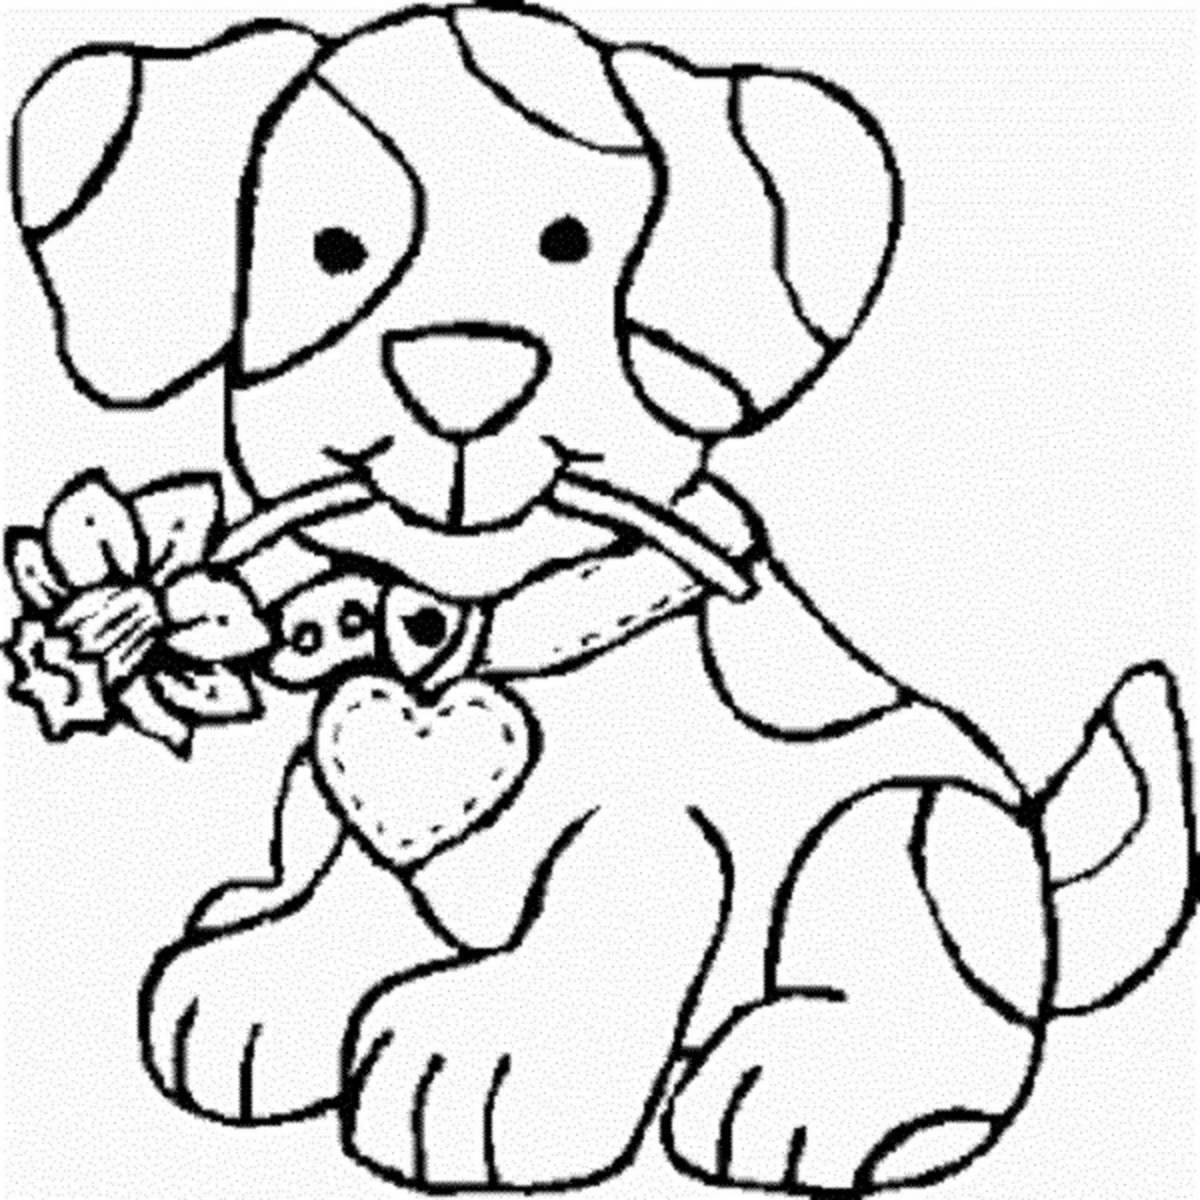 Spectacular dog coloring book for children 7-8 years old